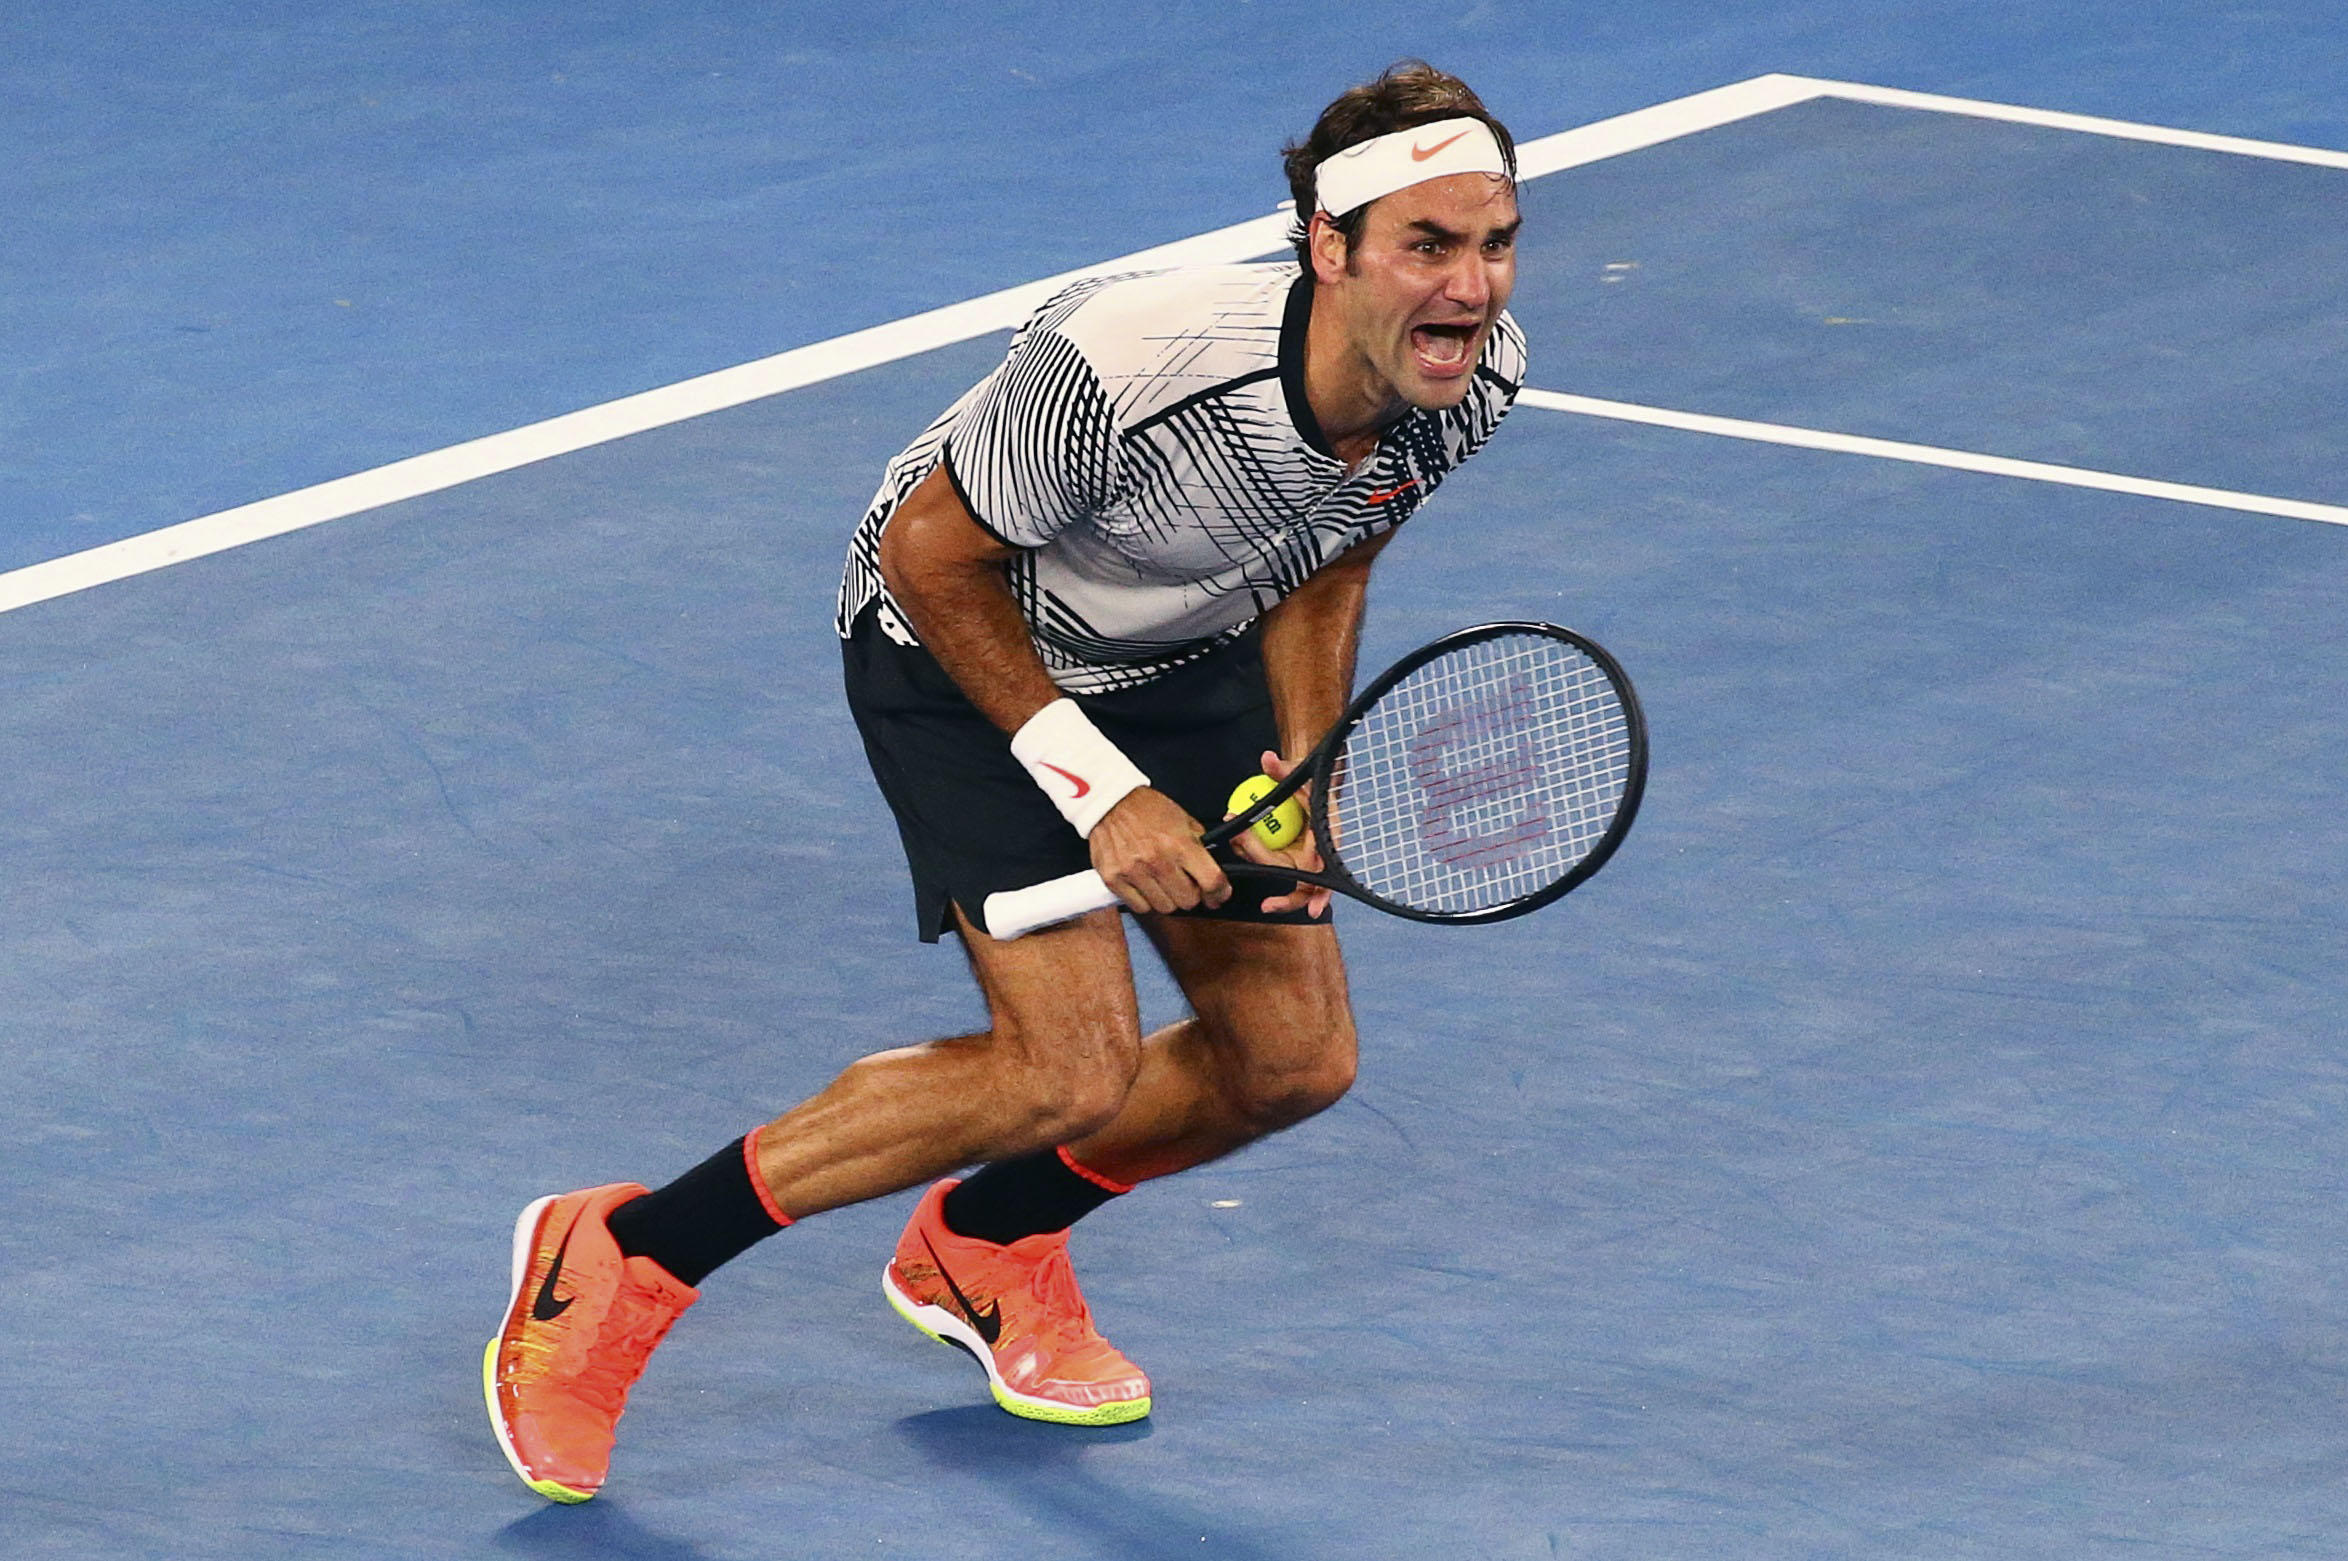 Roger Federer beats Rafael Nadal at Aussie Open to win 18th Grand Slam title